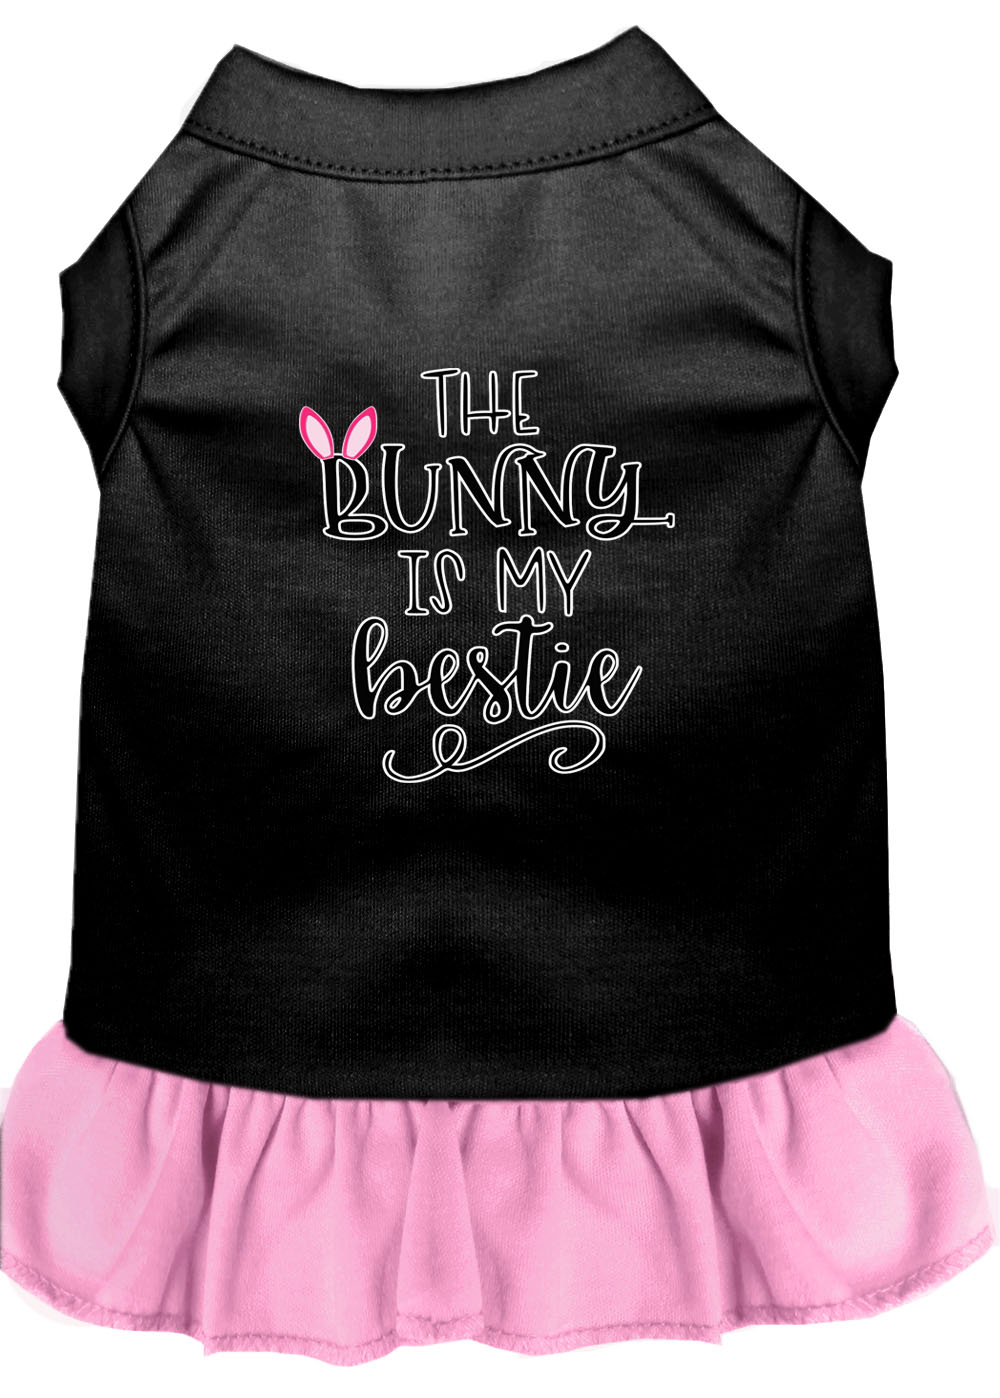 Bunny is my Bestie Screen Print Dog Dress Black with Light Pink Med